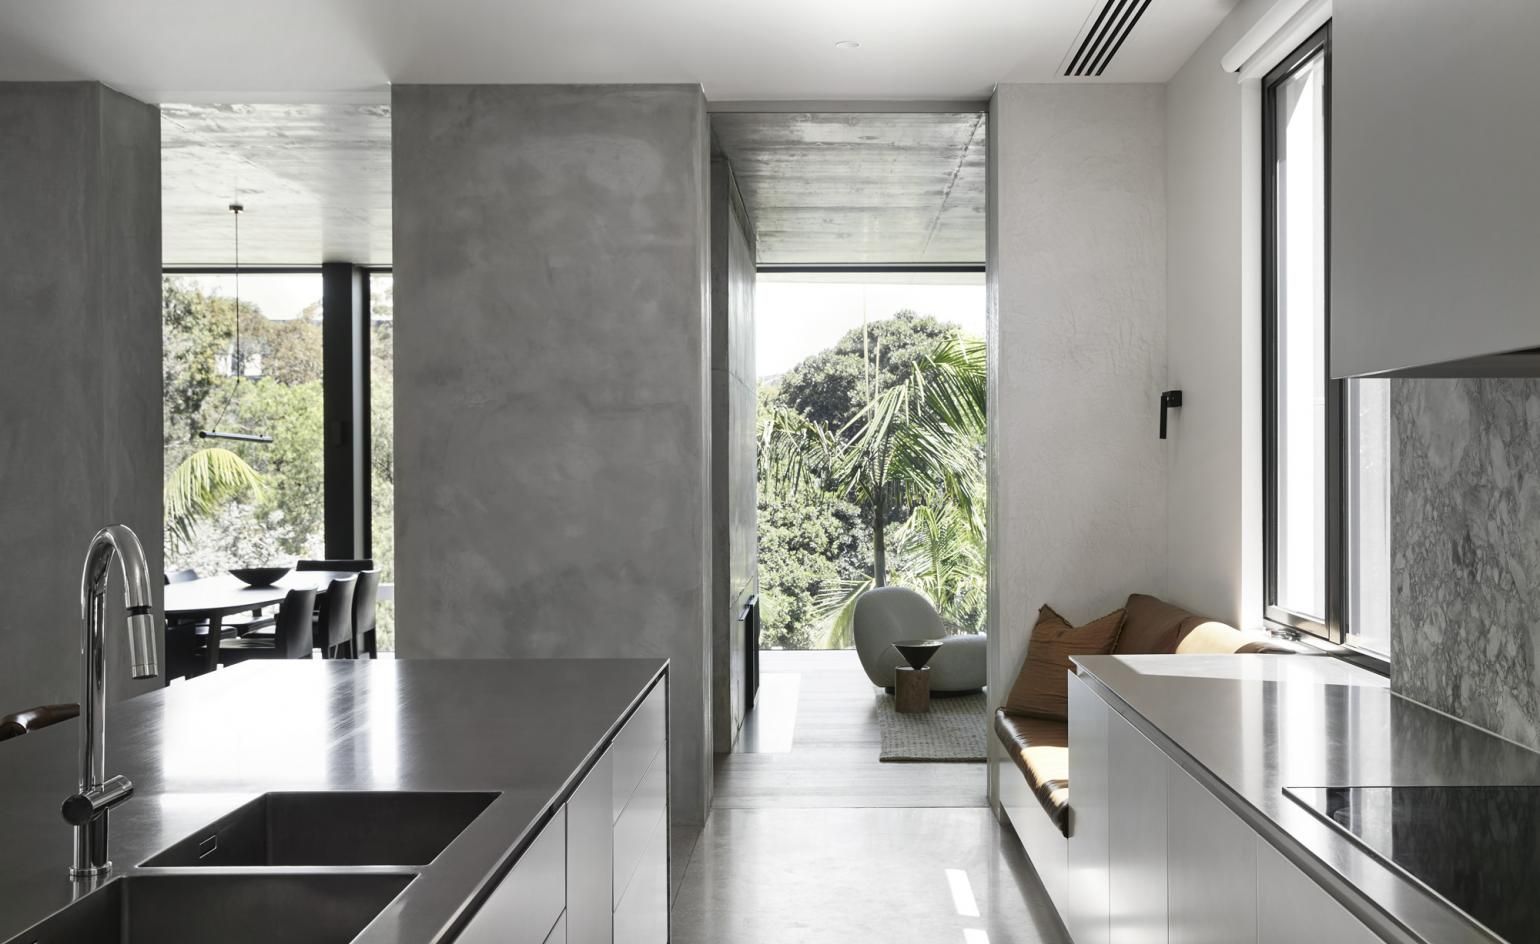 Concrete Melbourne home is engulfed in greenery | Wallpaper